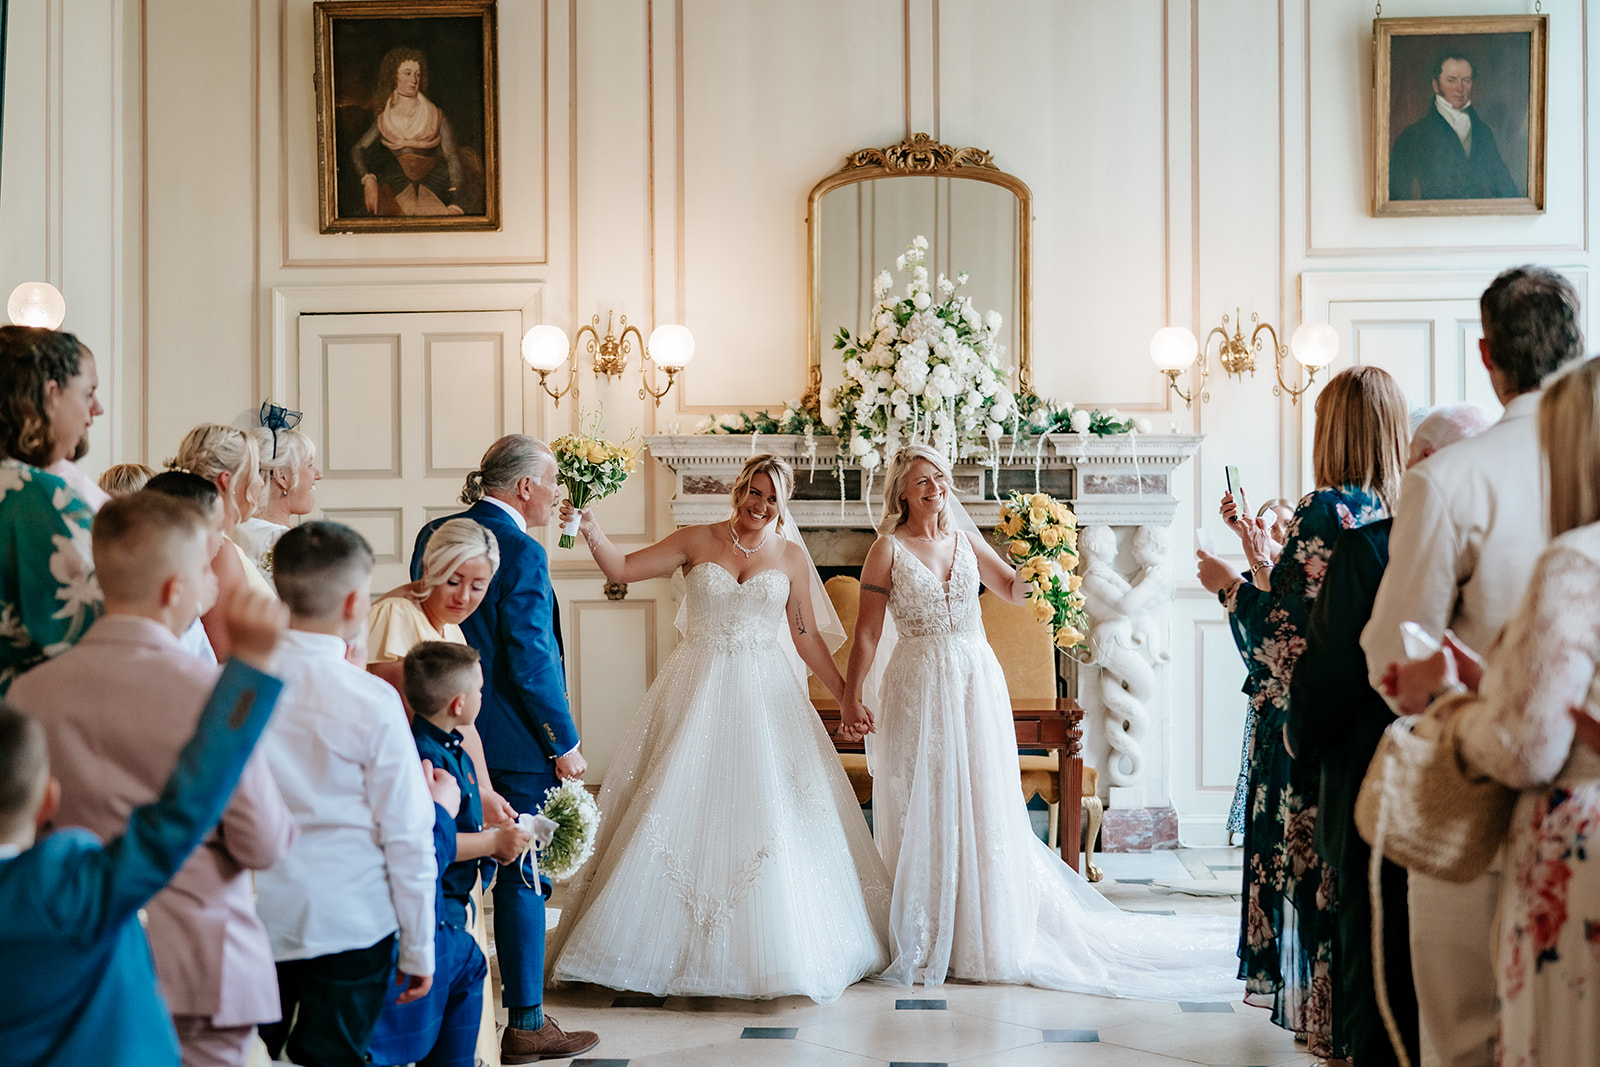 A married couple just married in the grand salon at gosfield hall